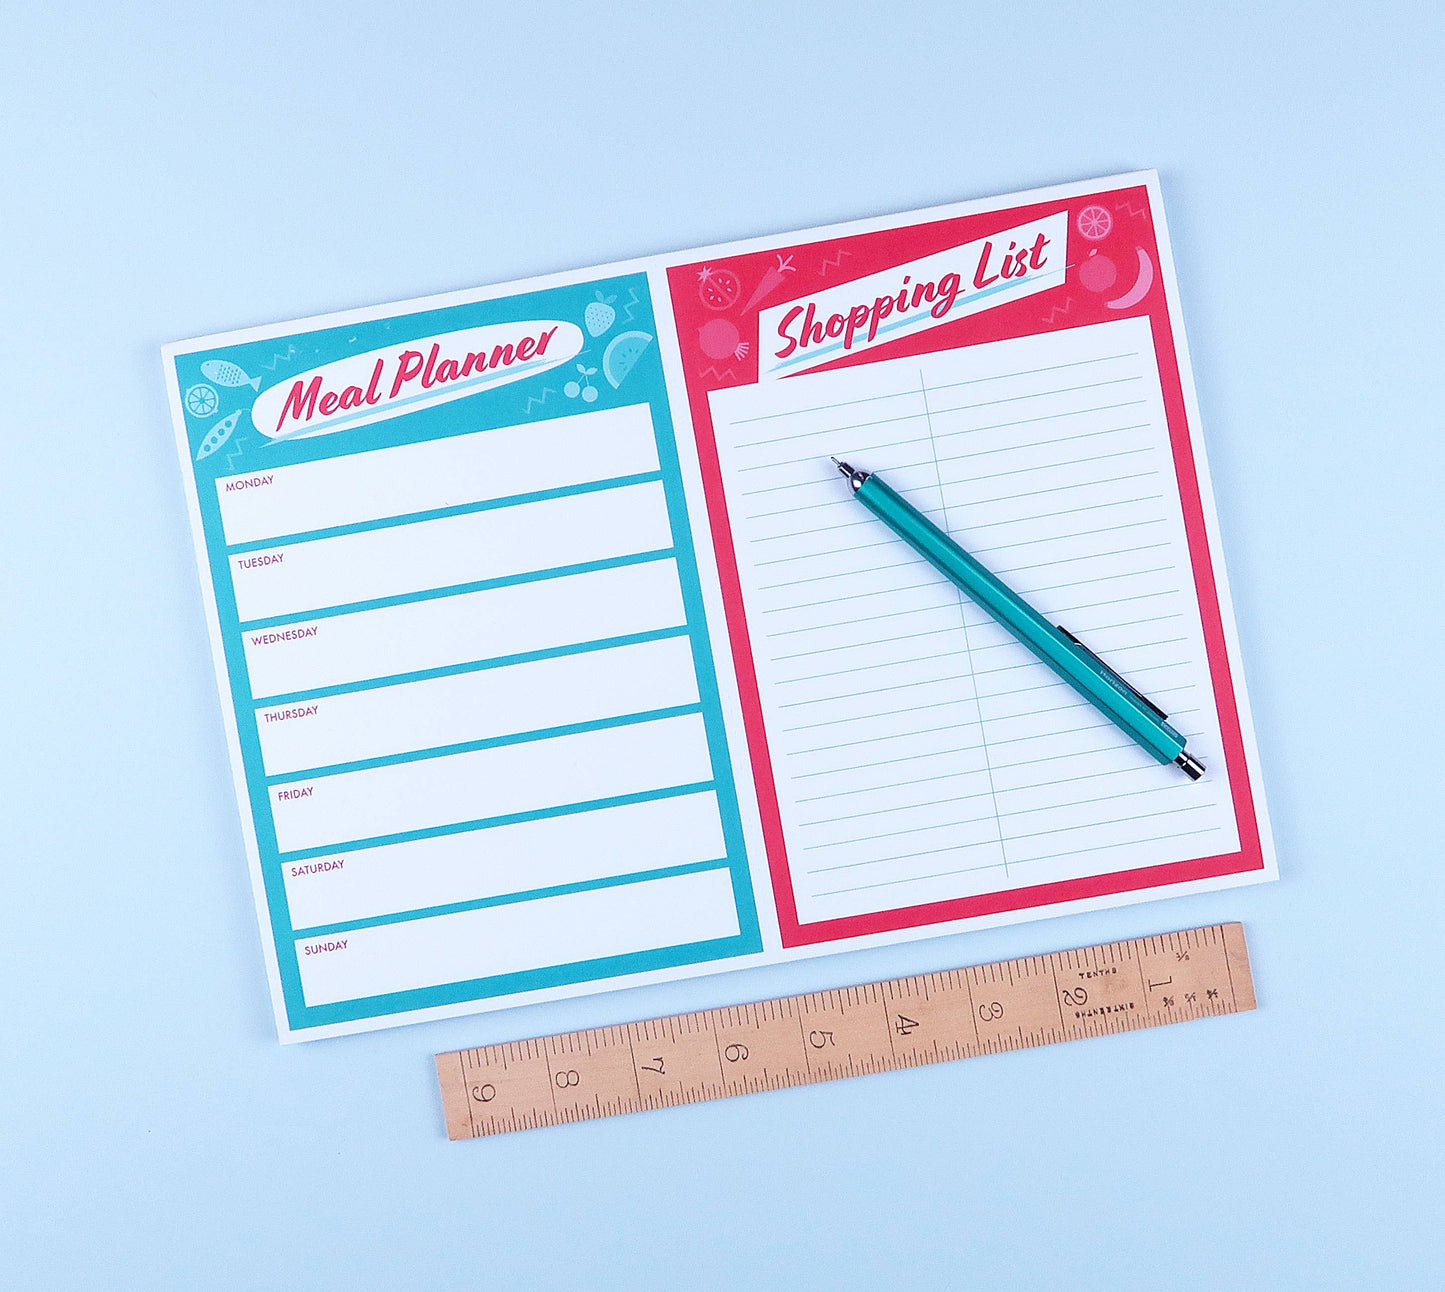 Meal Planner / Shopping List Pad (52 Sheets)